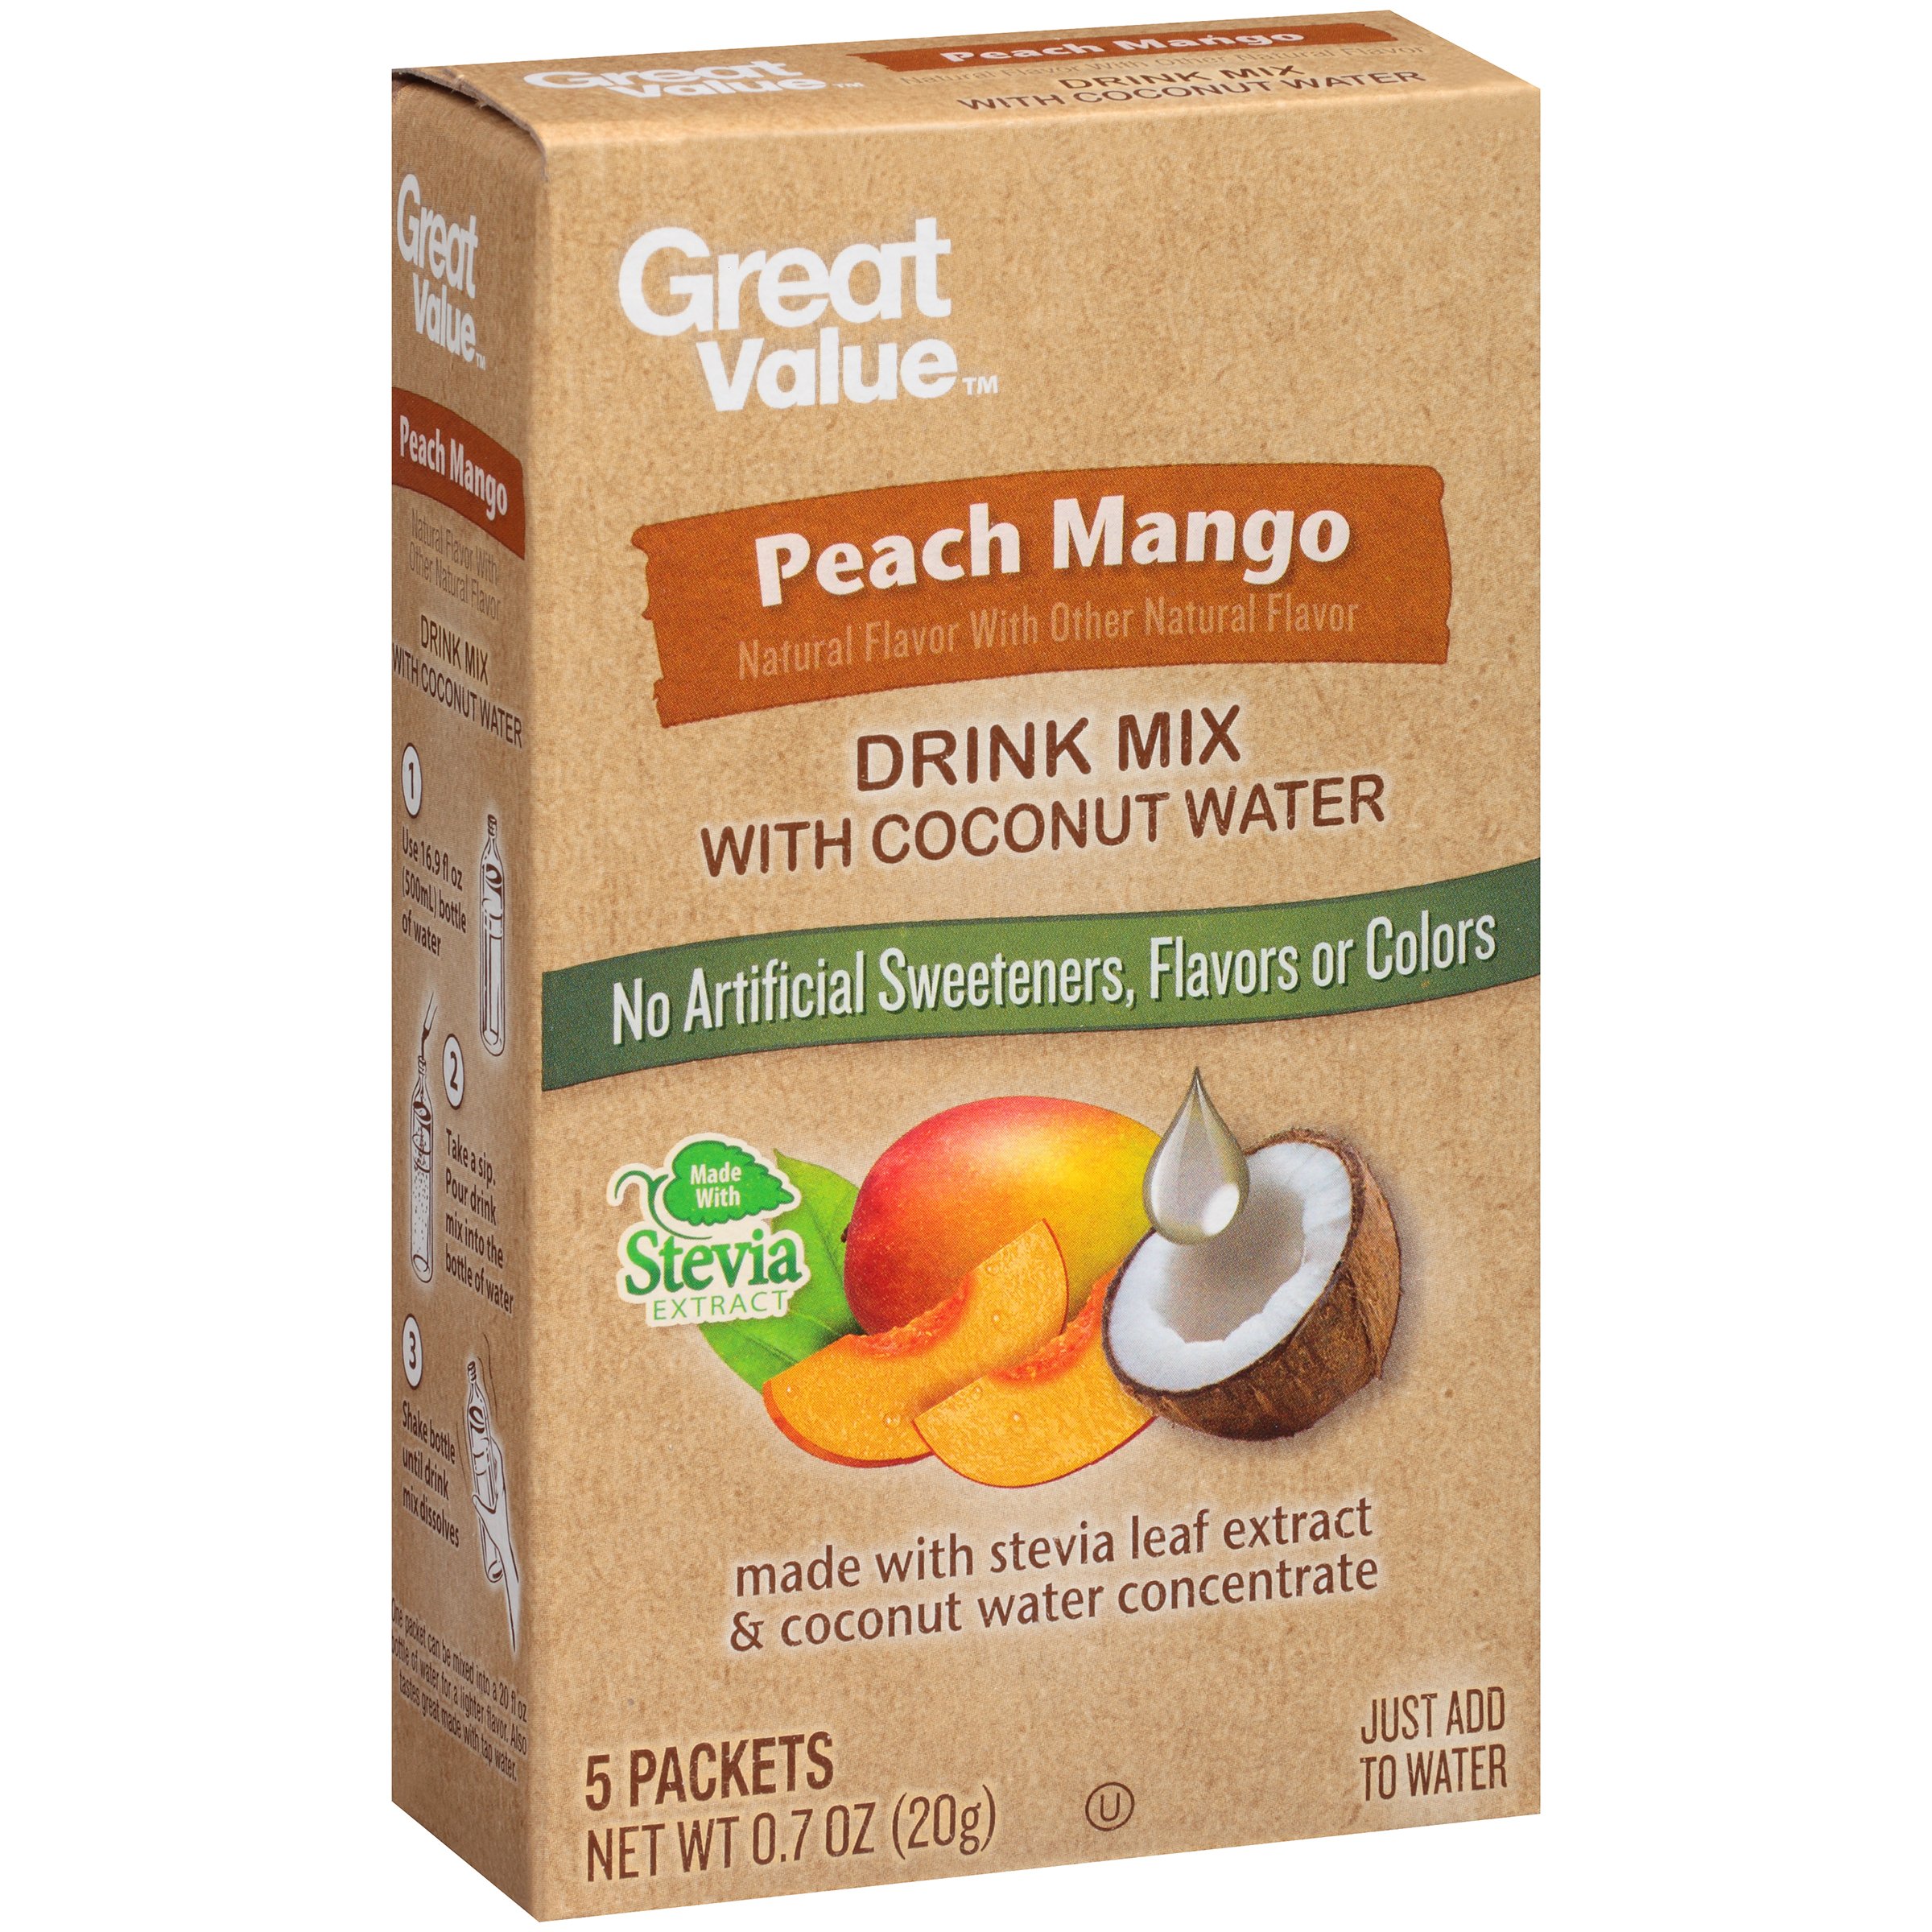 Great Value Peach Mango Drink Mix with Coconut Water, 0.7 Oz, 5 Count Image